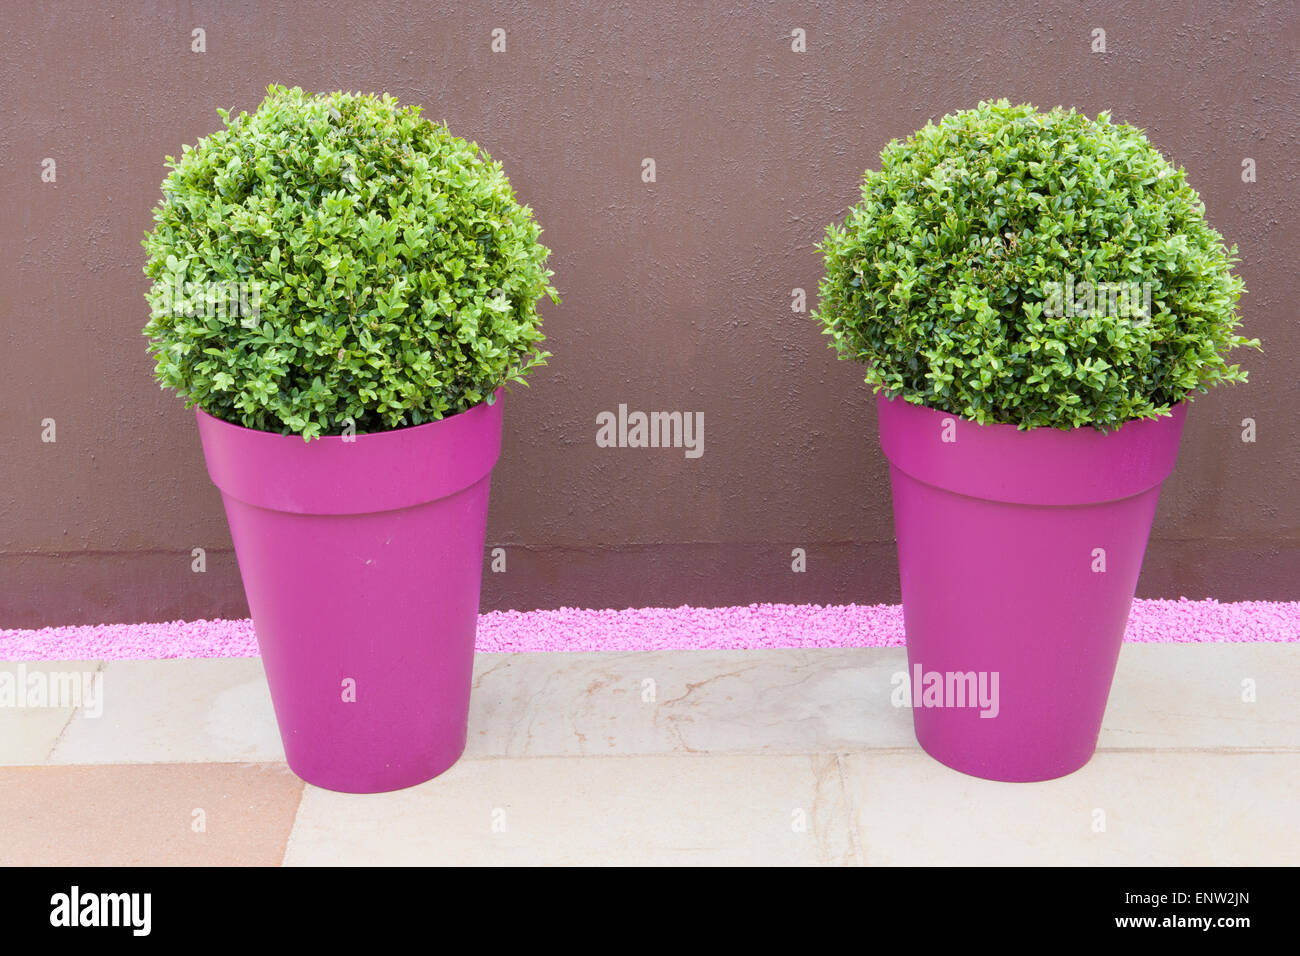 Buxus sempervirens - box balls RHS Malvern spring show 2014 Blush designed by Pip Probert Outer Spaces Design Ltd awarded Silver Stock Photo